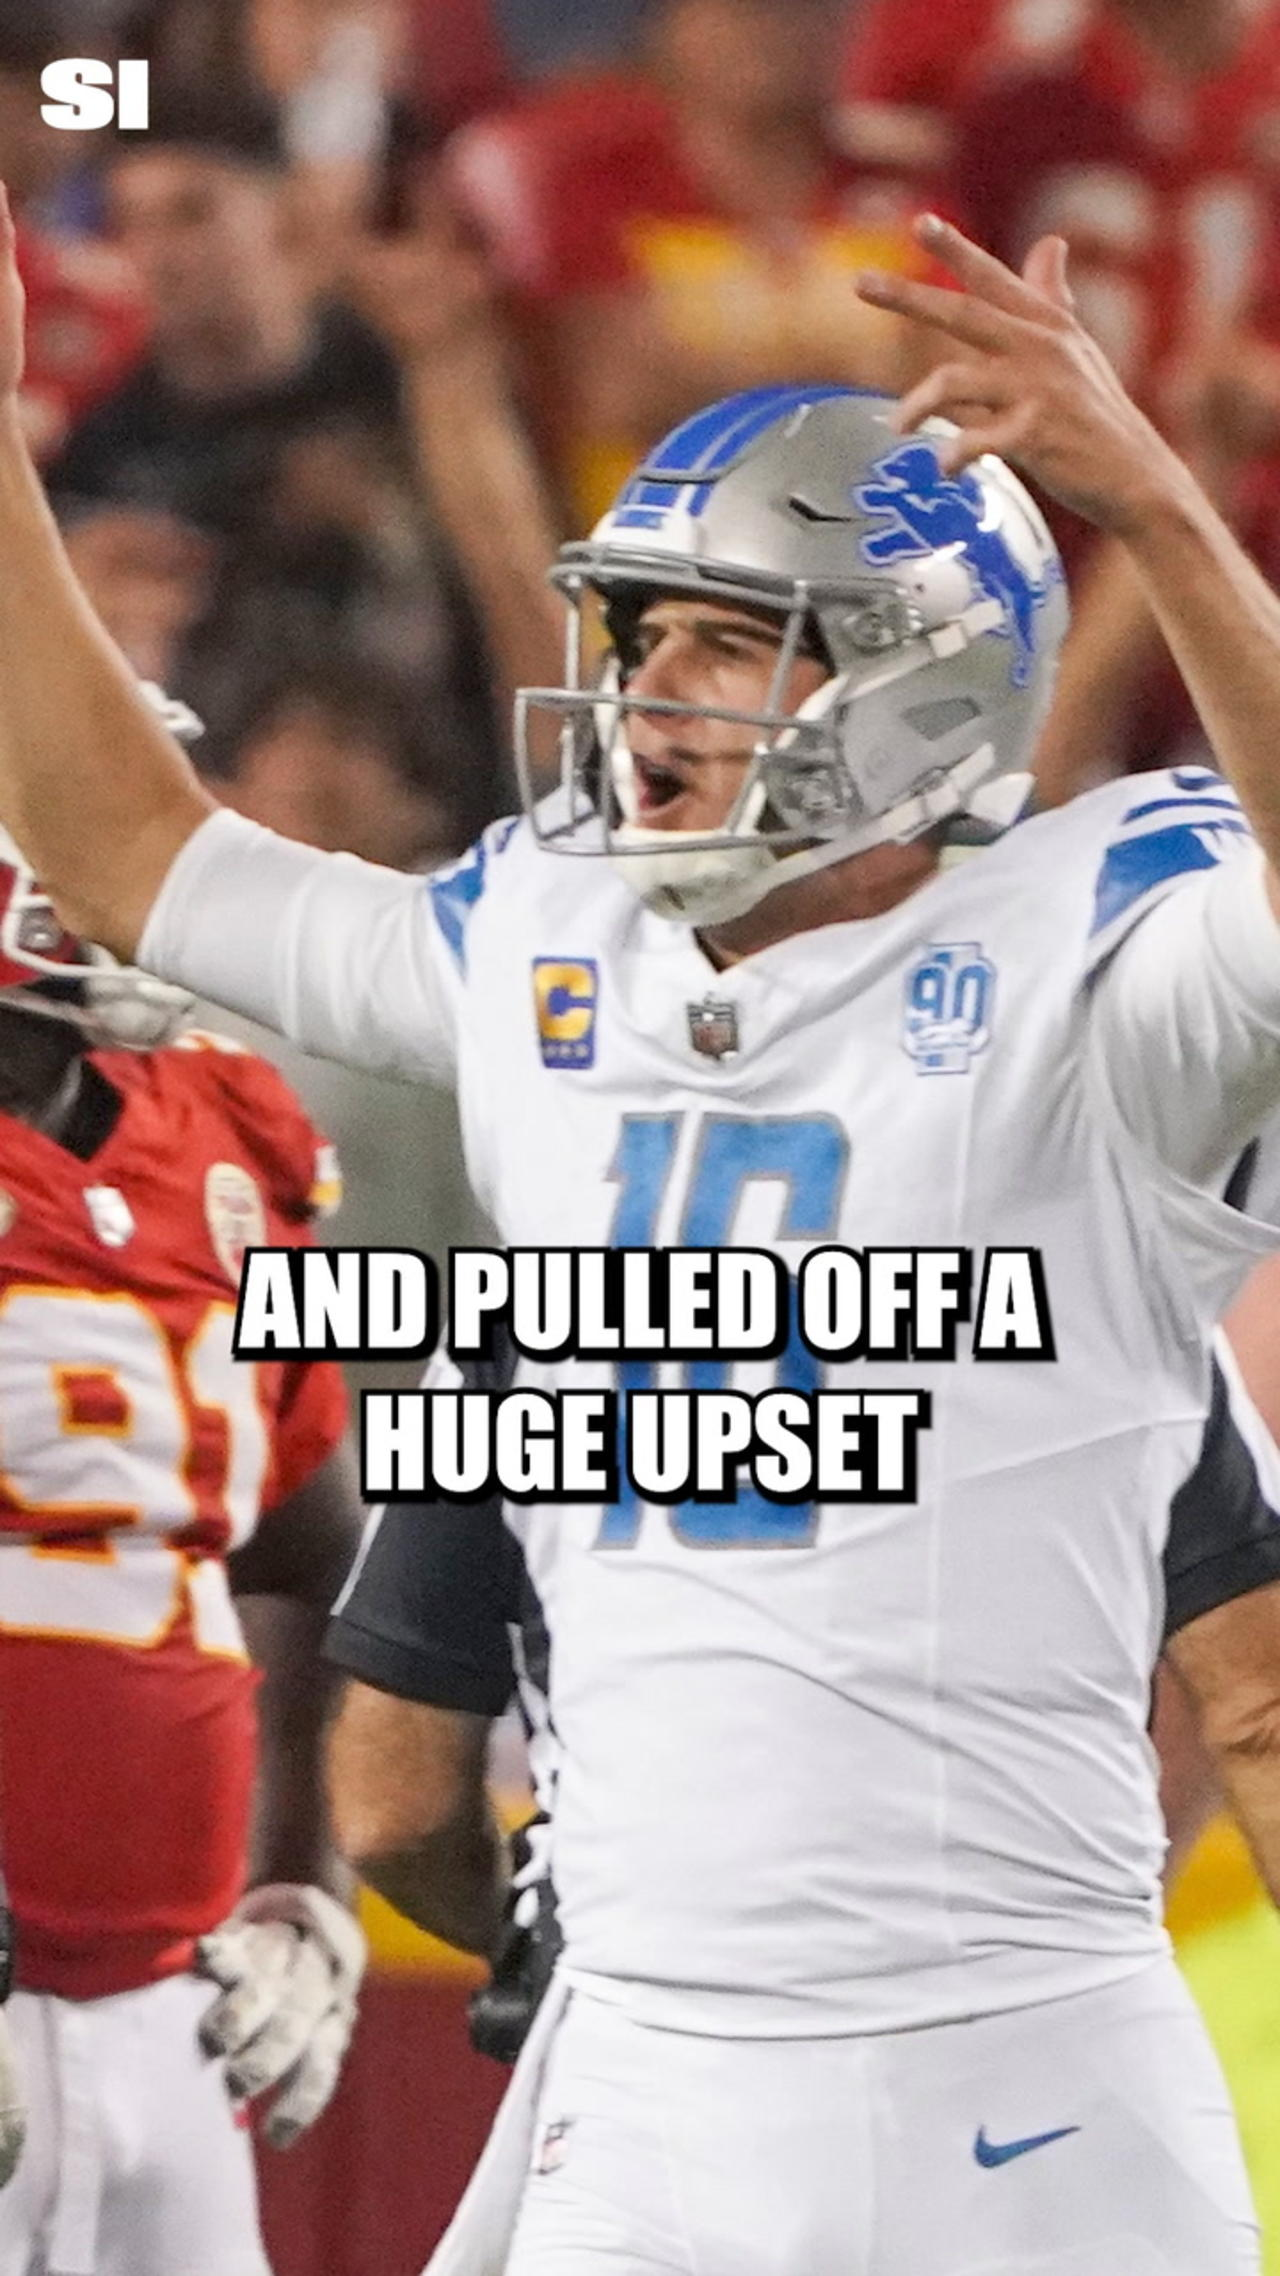 Detroit Lions Claim Upset Over Reigning Champions Kansas City Chiefs in NFL Season Opener